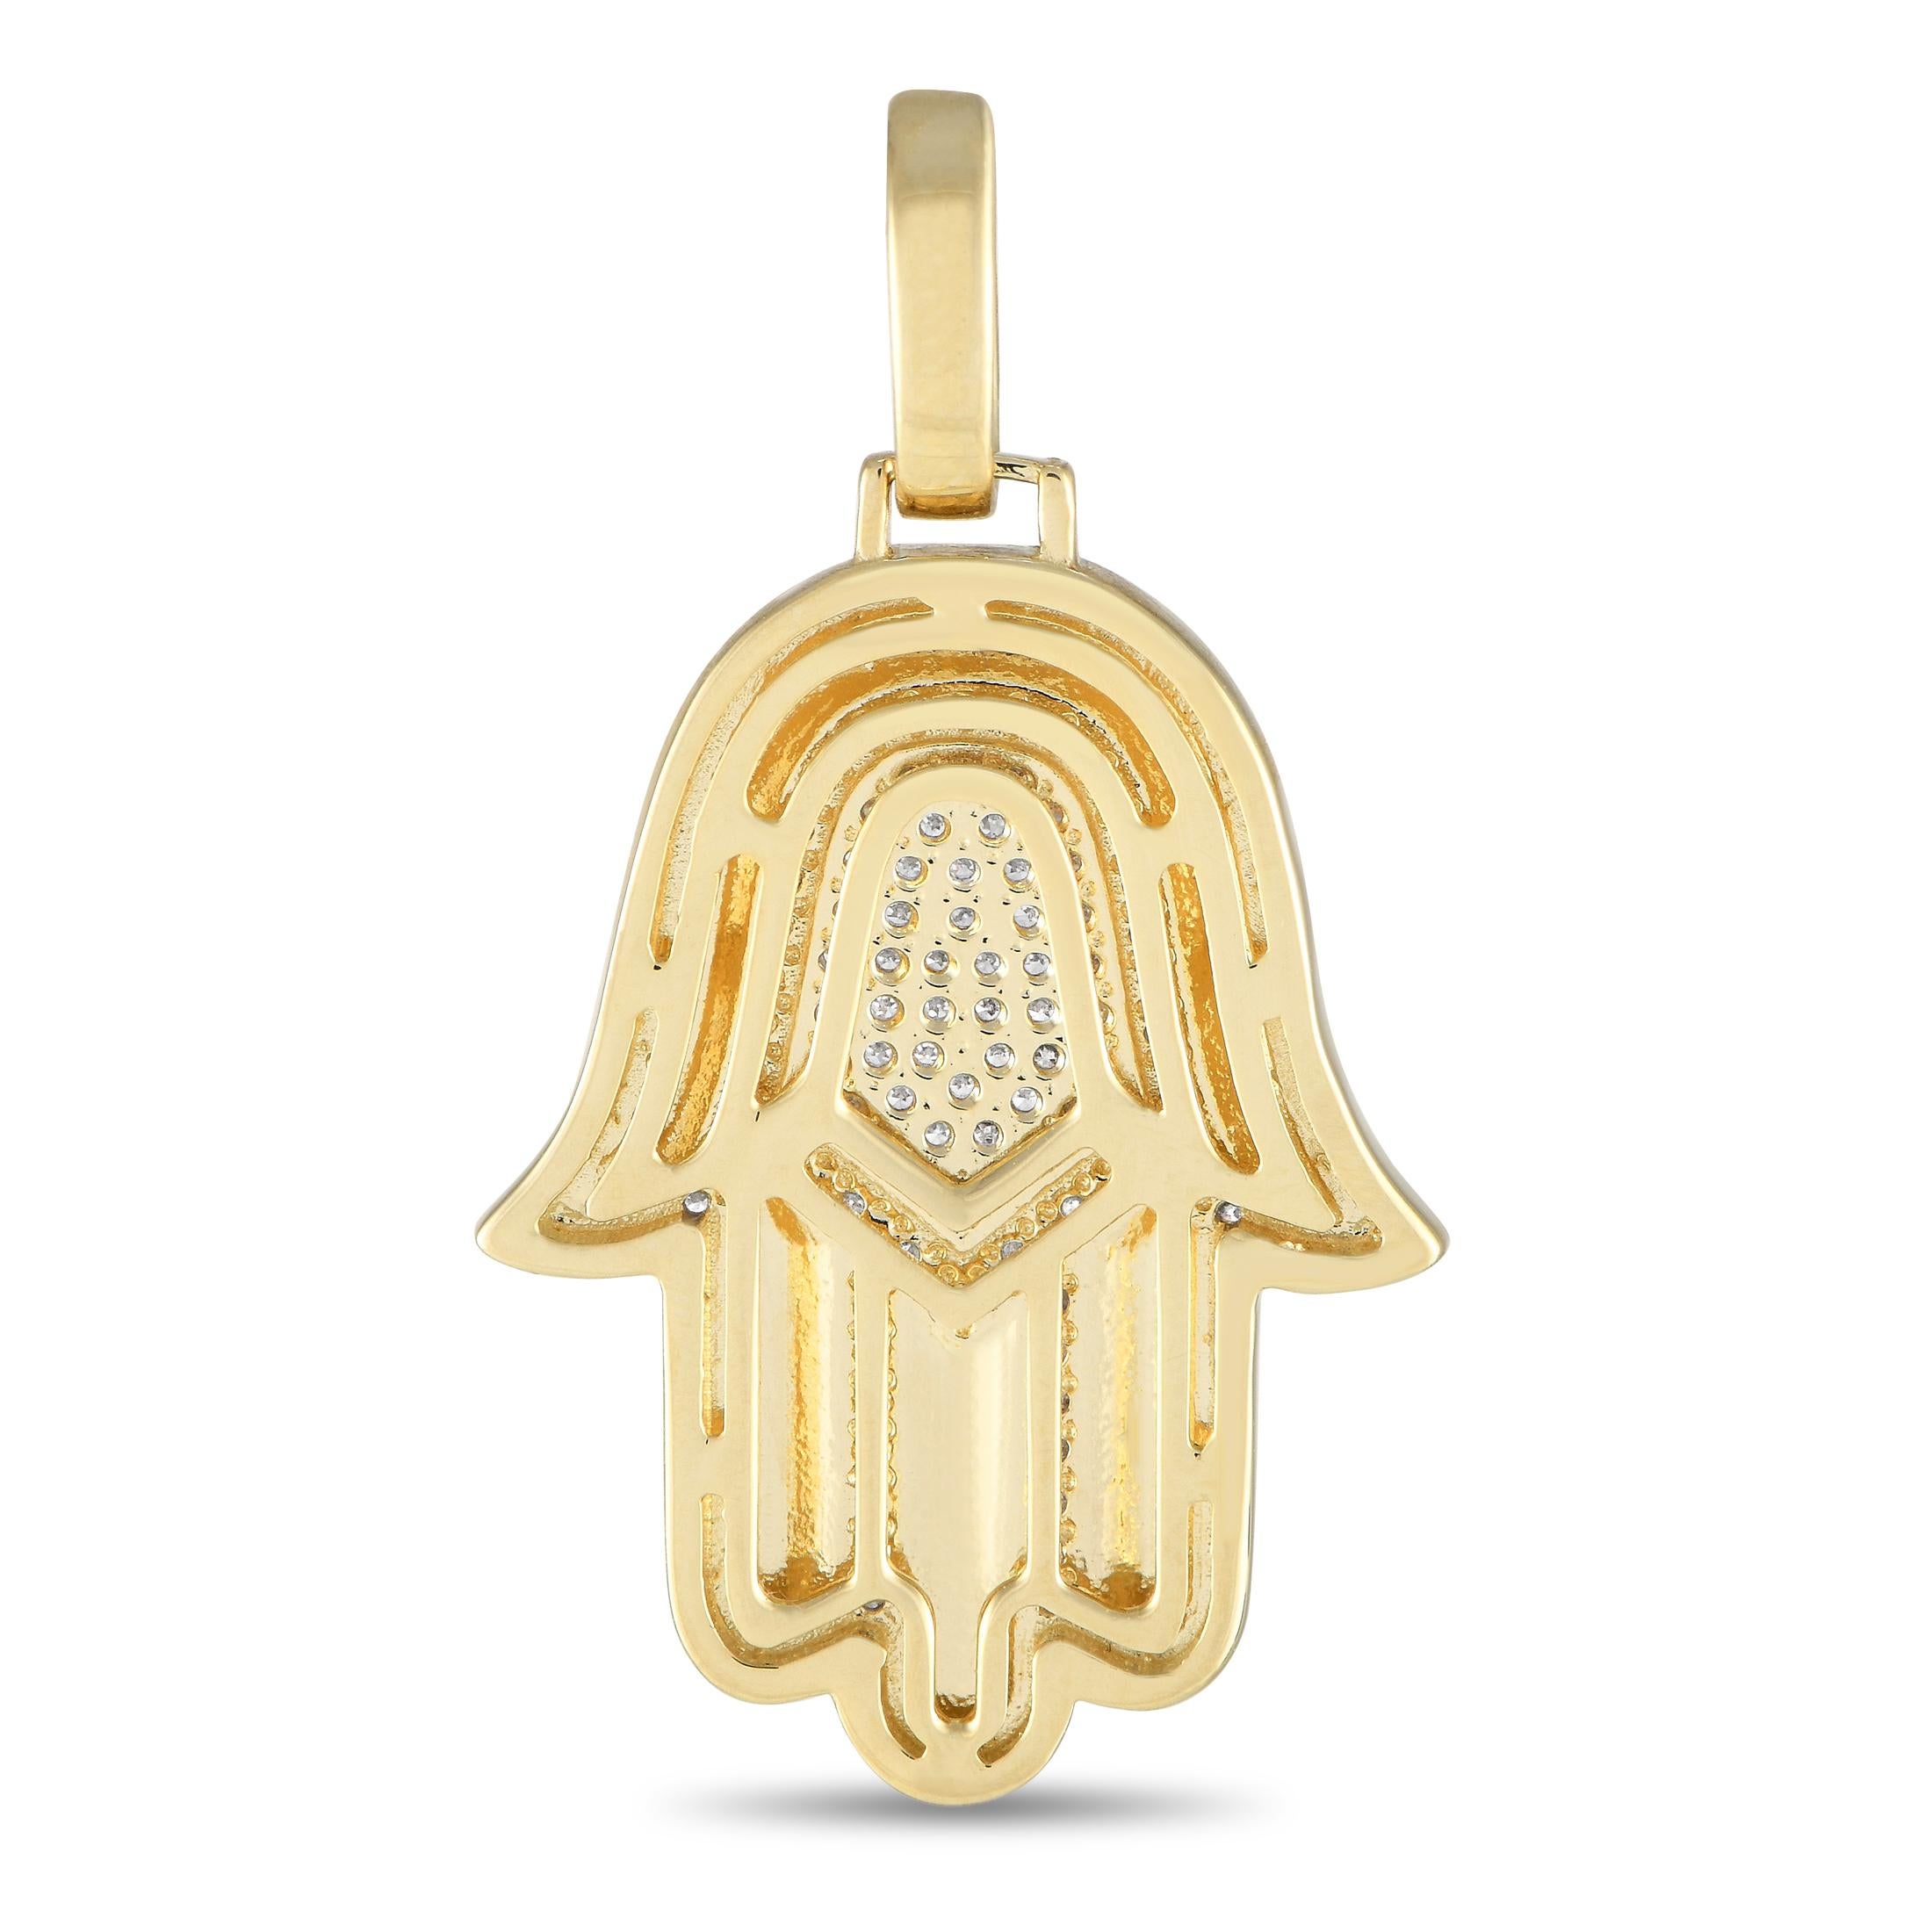 The Hamsa is an ancient spiritual symbol meant to ward off unseen evil forces. This luxury Hamsa pendant is crafted from opulent 14K Yellow Gold and shines to life thanks to Diamonds with a total weight of 0.50 carats. It measures 1.45 long by 0.75